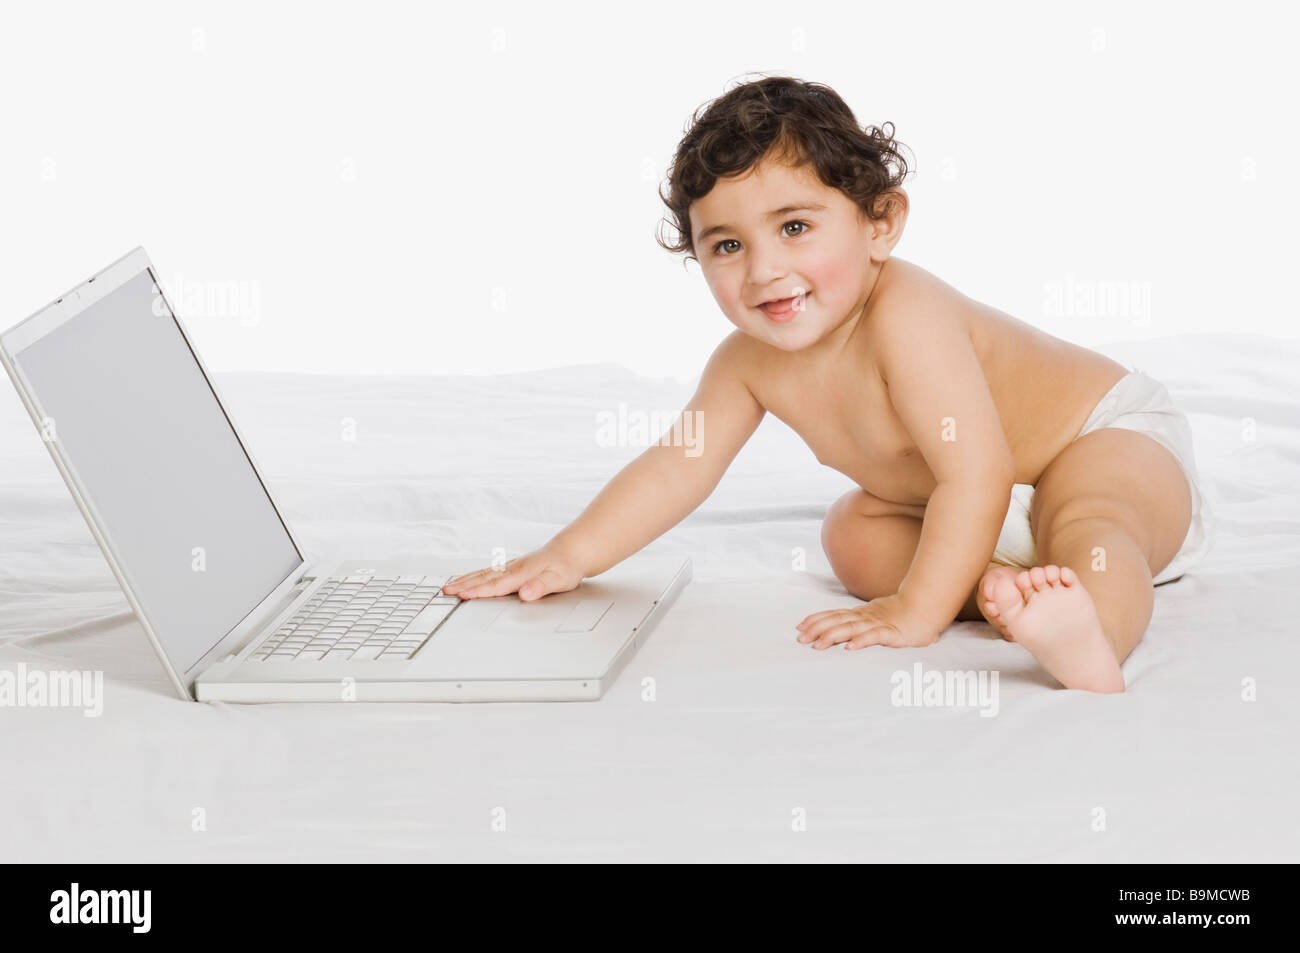 Baby boy playing with a laptop Stock Photo